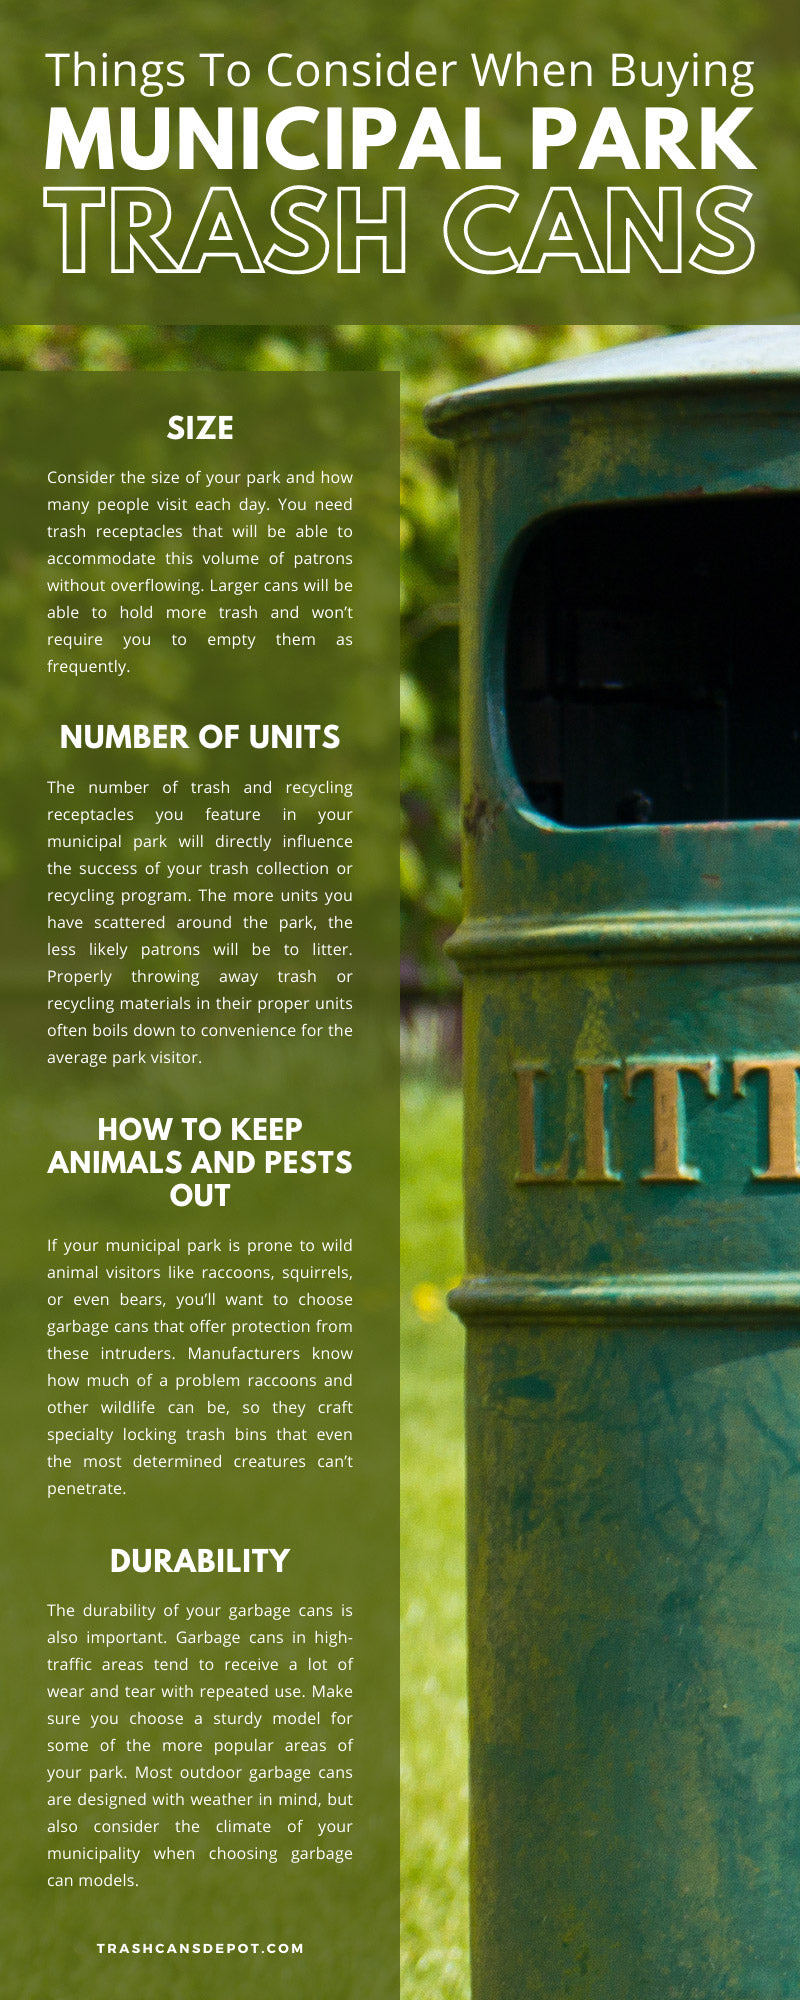 7 Things To Consider When Buying Municipal Park Trash Cans